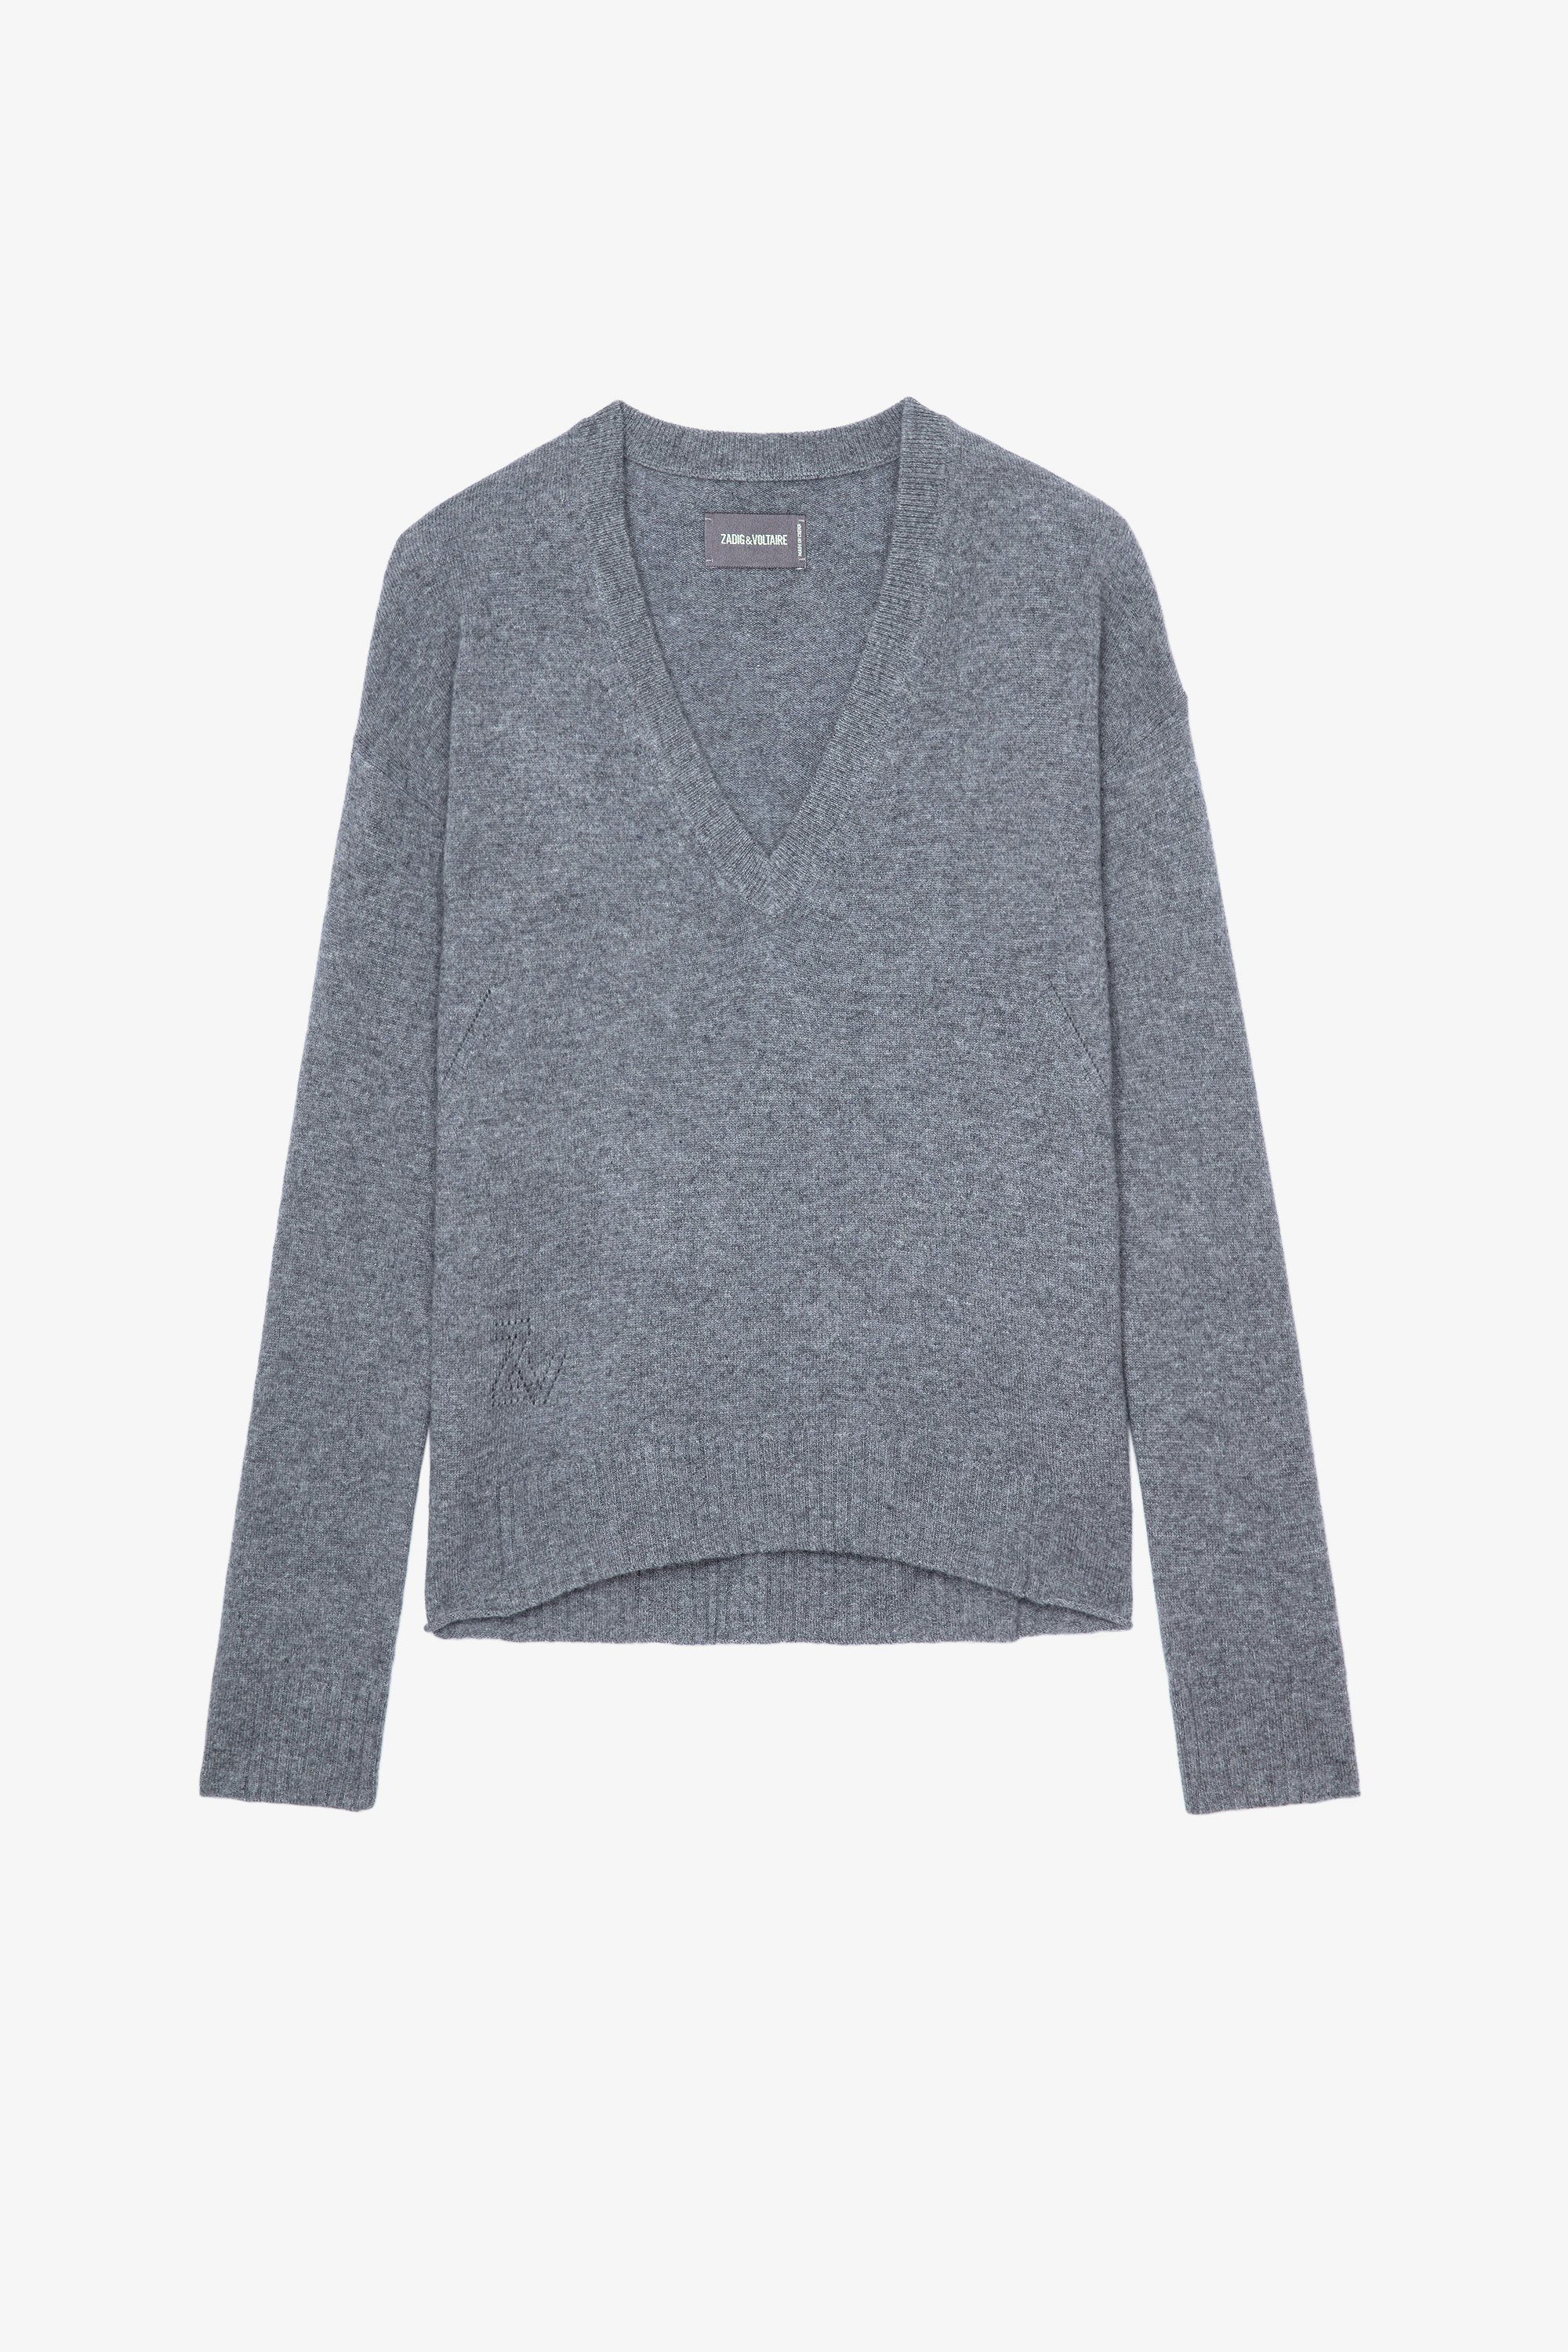 Vivi Patch カシミヤニット Grey cashmere jumper with star patches on the elbows